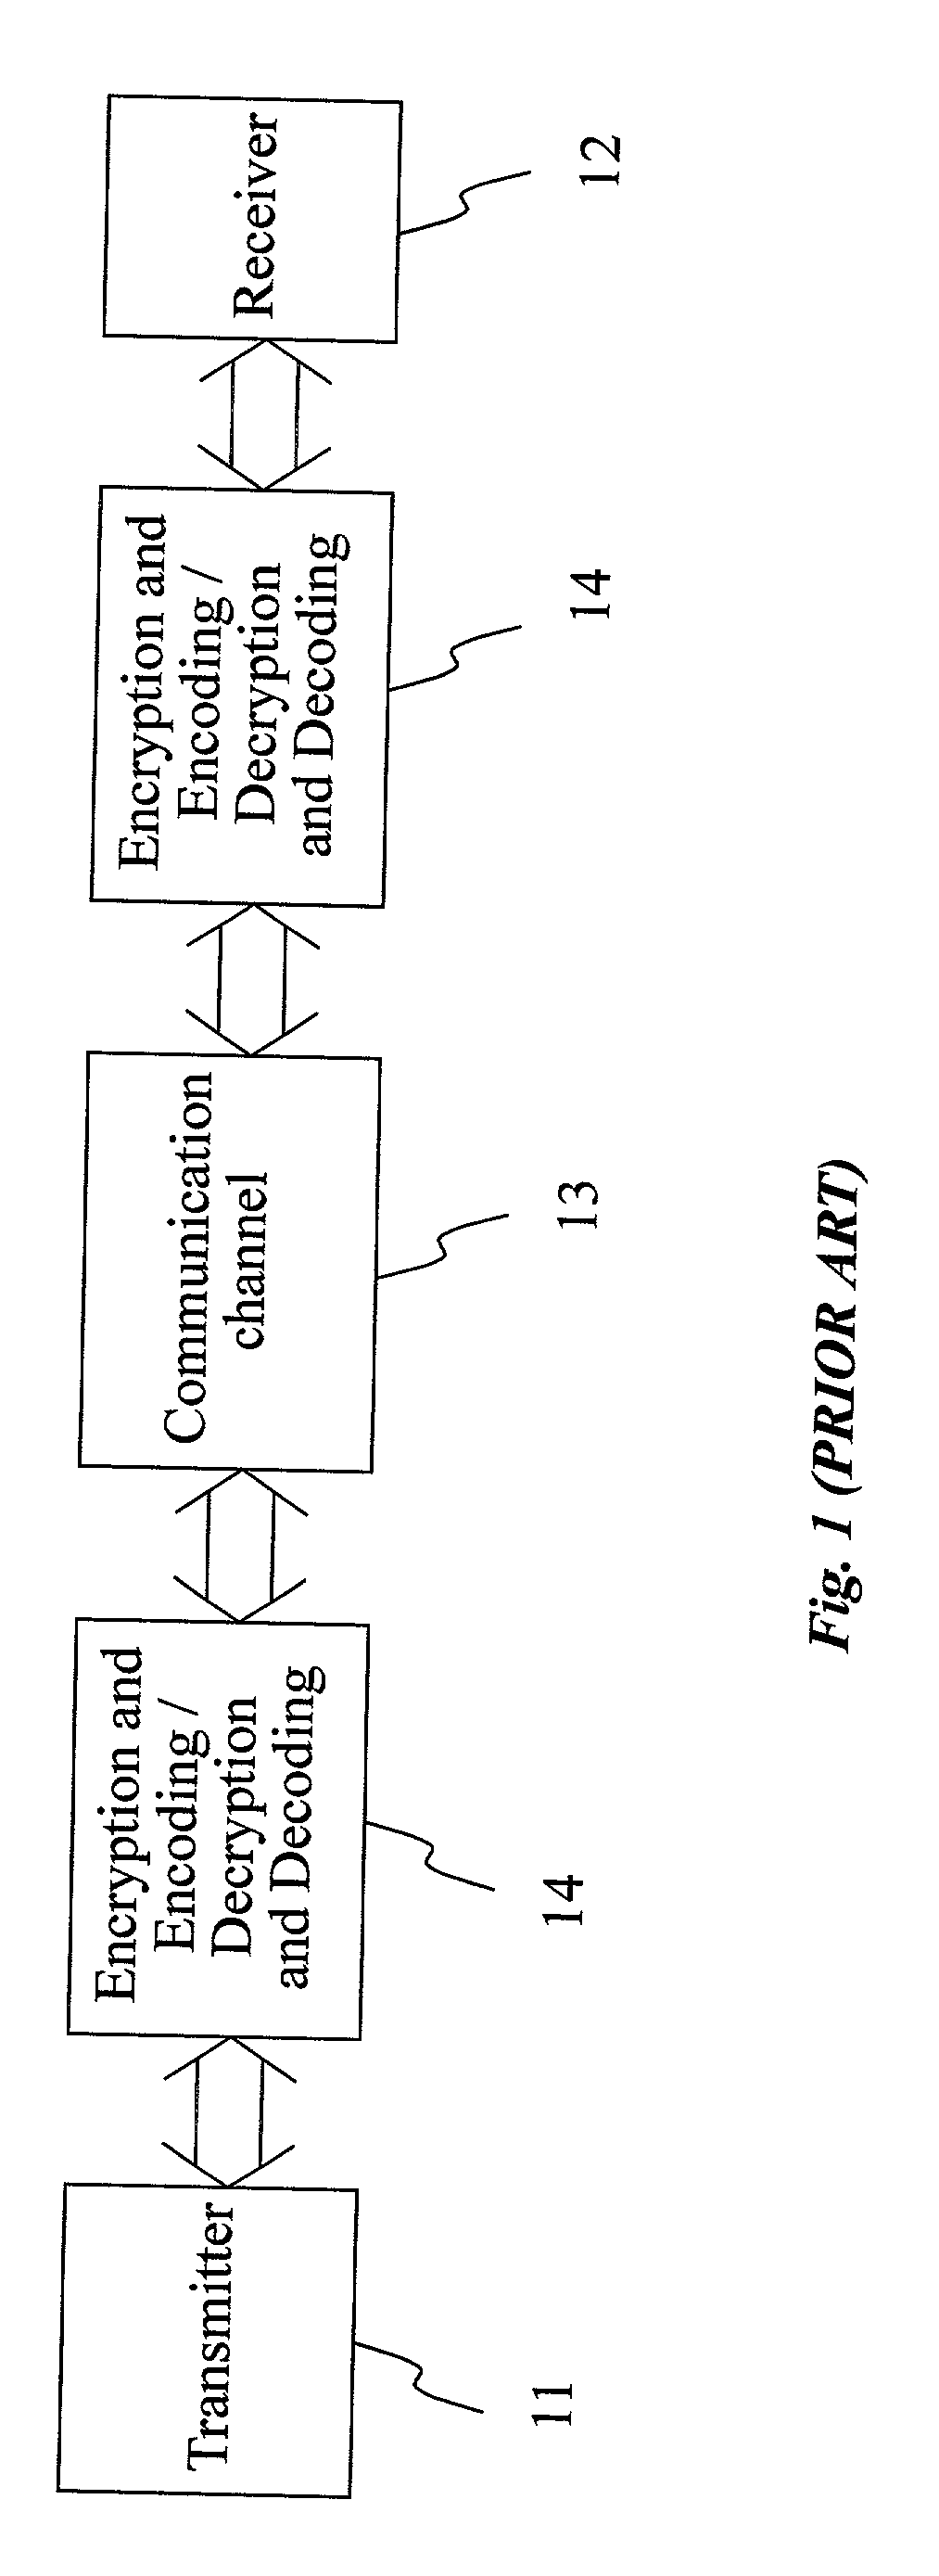 System and method for joint encryption and error-correcting coding